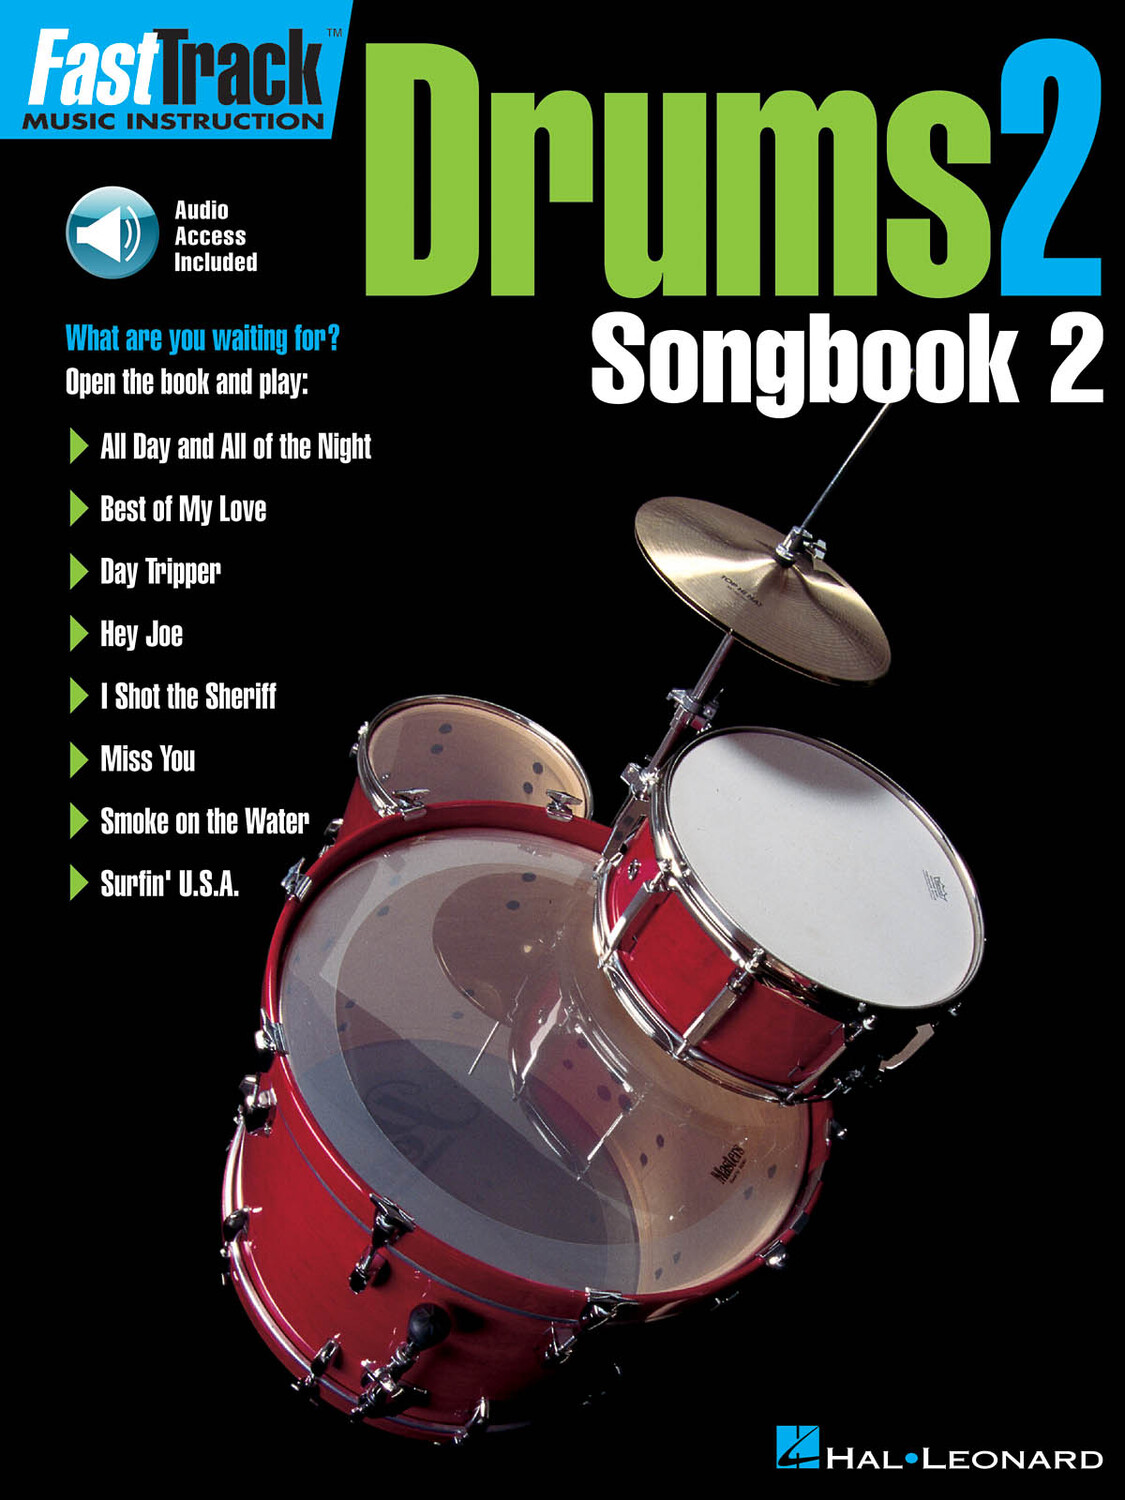 Cover: 73999953718 | FastTrack - Drums 2 - Songbook 2 | Fast Track Music Instruction